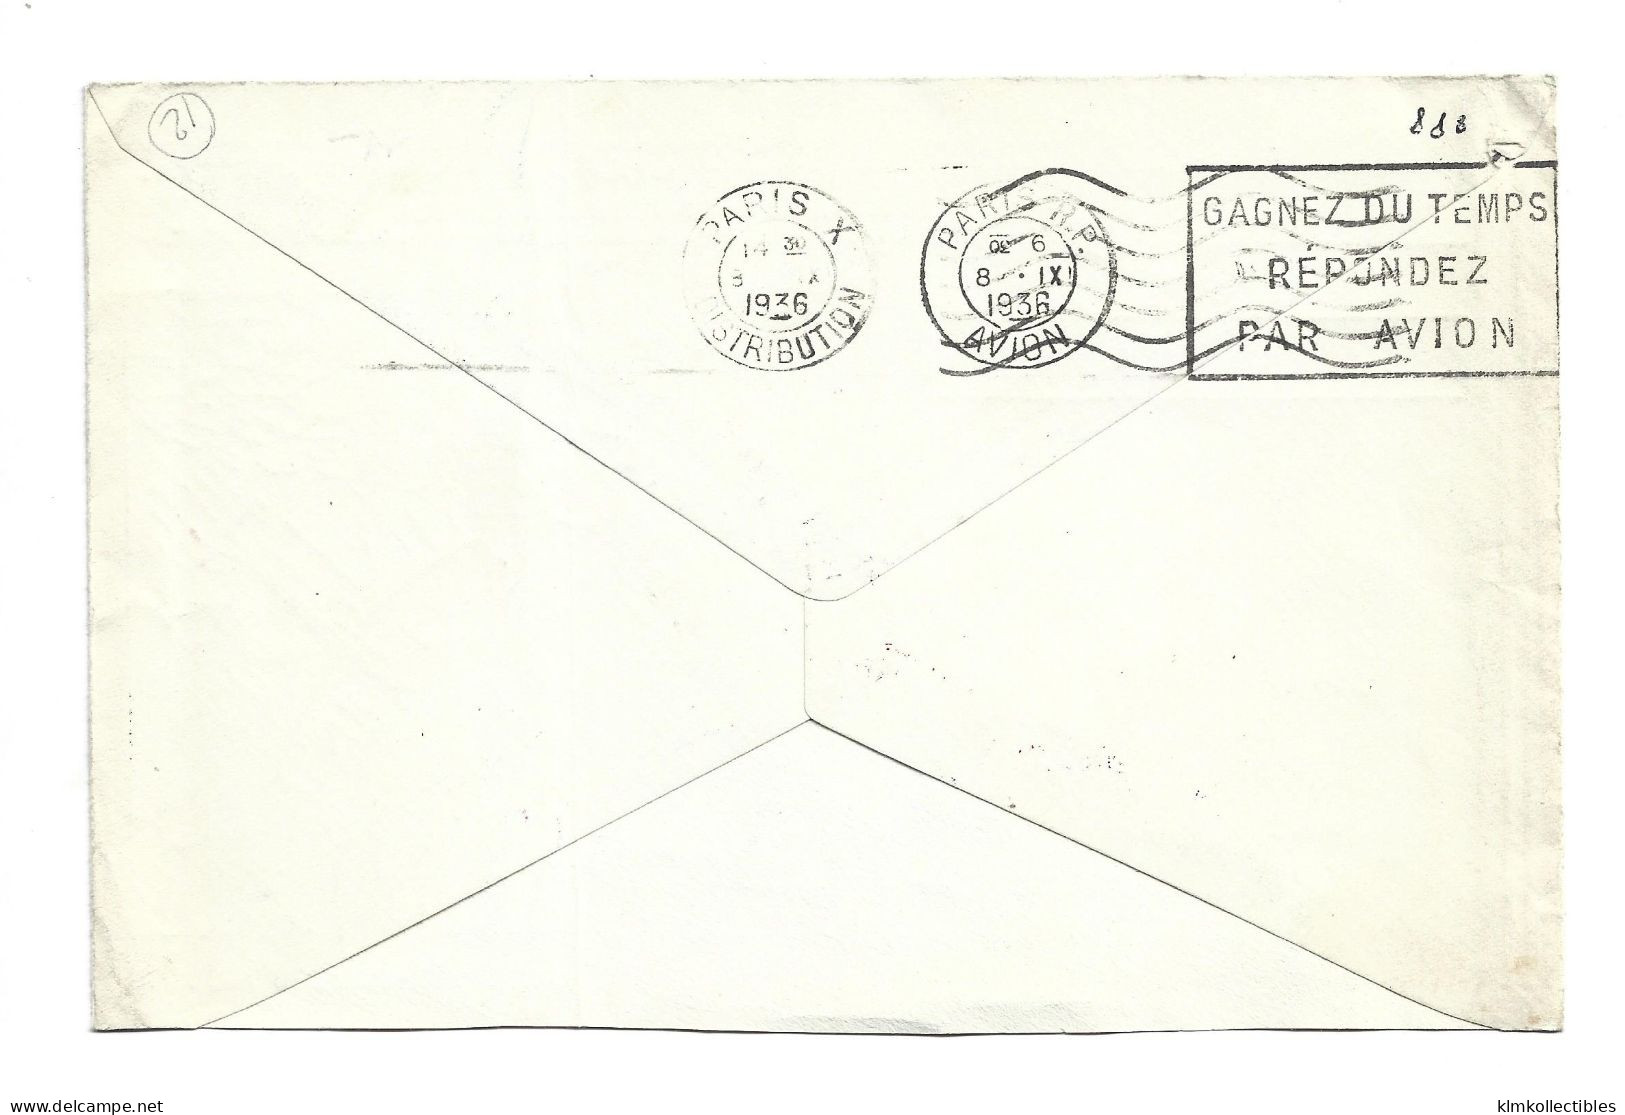 DENMARK DANMARK - AIRMAIL LUFTPOST COVER TO FRANCE - 1936 NEPA SPECIAL CANCEL FIRST 1ST FLIGHT - Aéreo